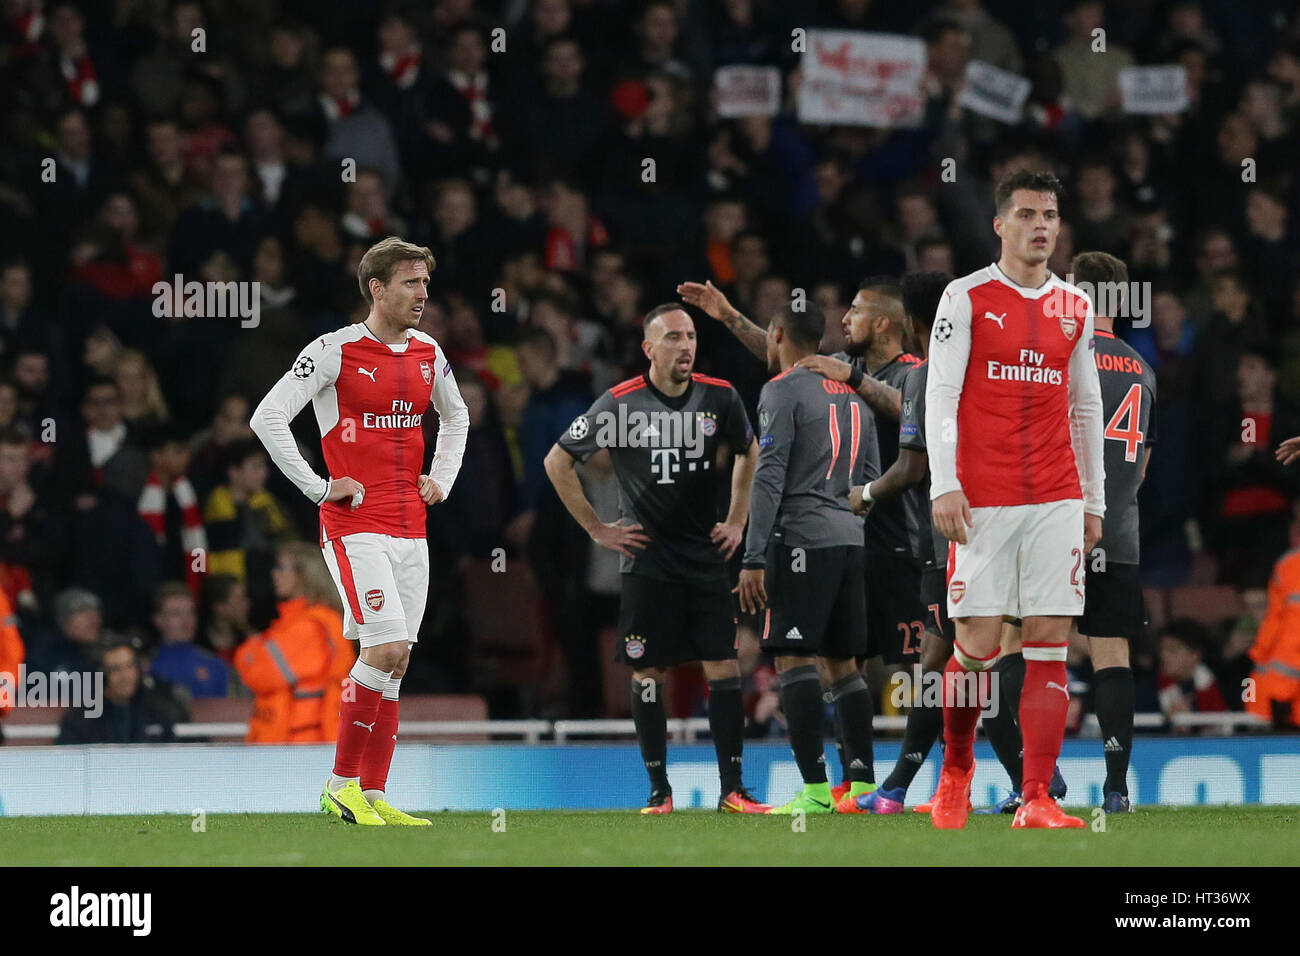 London, UK. 7th Mar, 2017. Nacho Monreal(1st L) and Granit Xhaka of Arsenal look dejected during the UEFA Champions League Round of 16 second leg match between Arsenal and Bayern Munich in London, Britain on March 7, 2017. Bayern Munich won 5-1 and advanced to the quarterfinal with 10-2 on aggregate. Credit: Tim Ireland/Xinhua/Alamy Live News Stock Photo